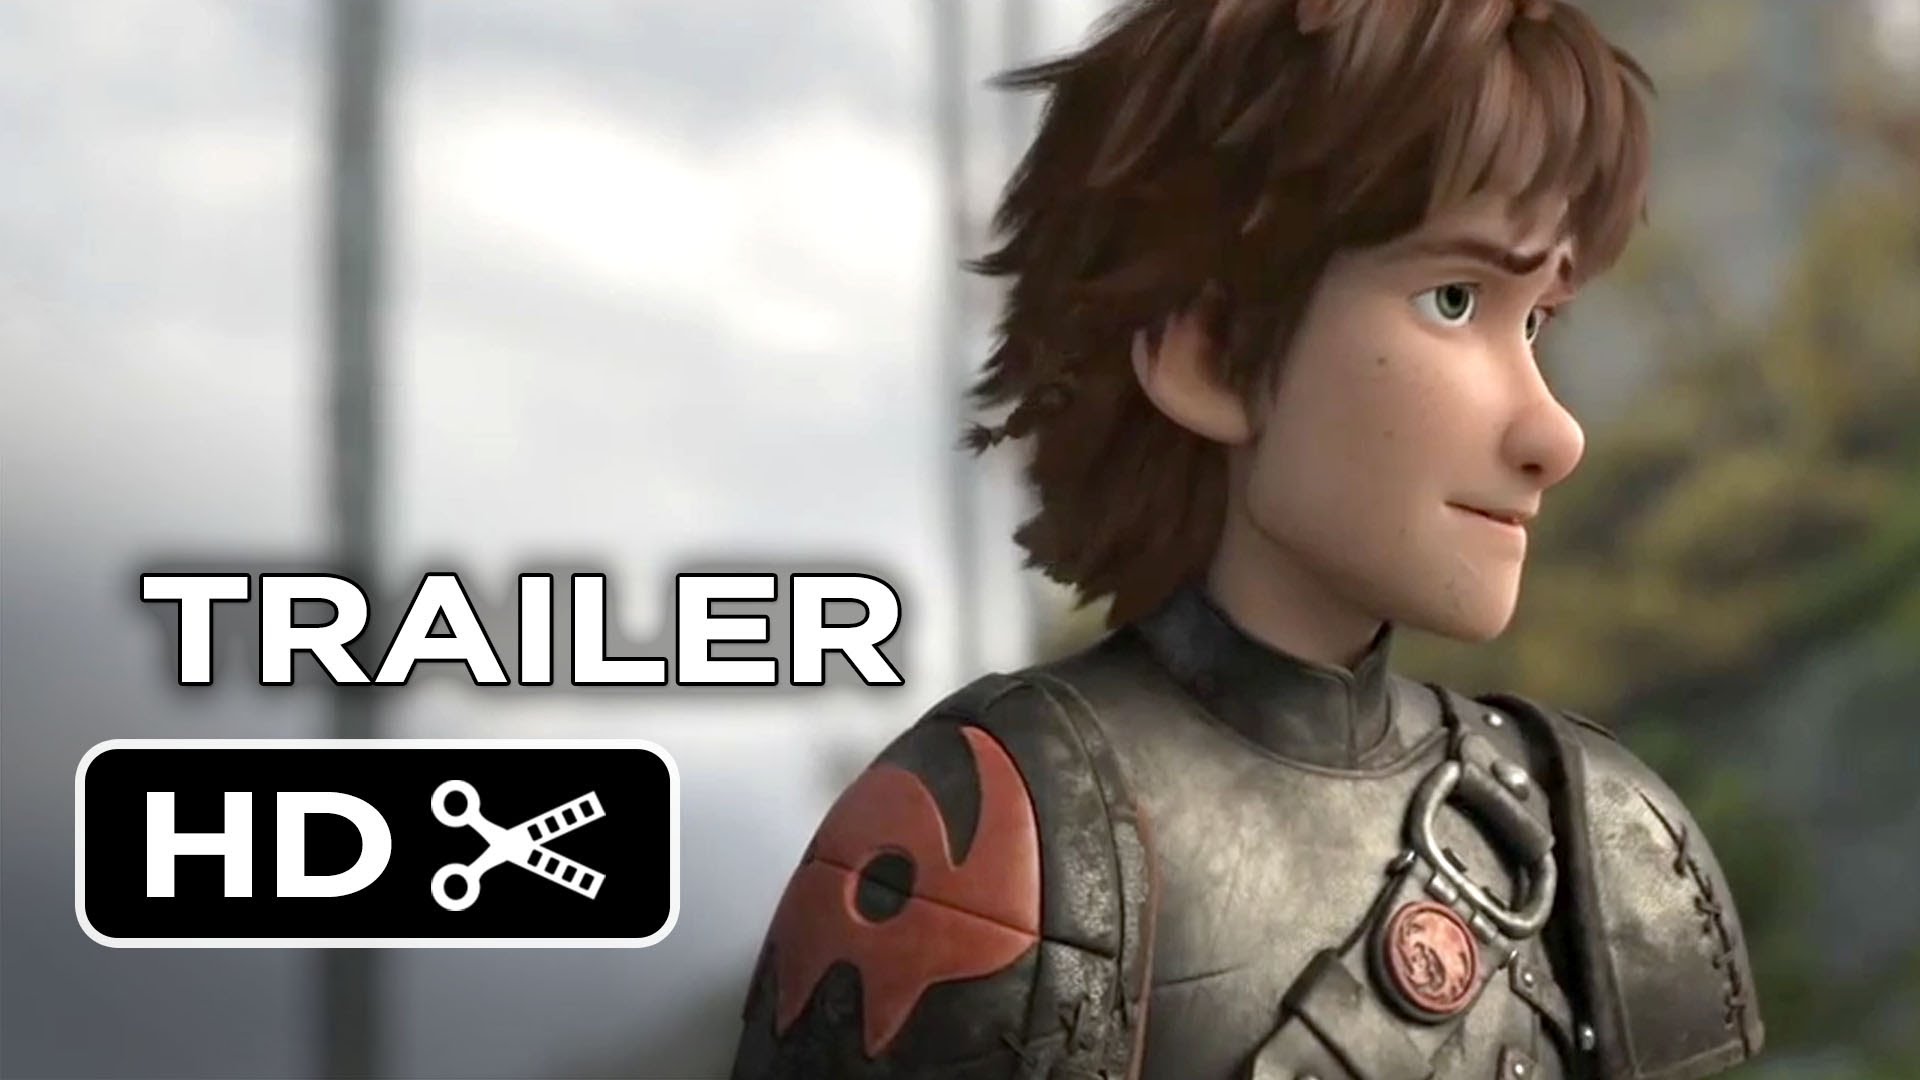 How To Train Your Dragon 2 Official Trailer #1 (2014) - Animation Sequel HD